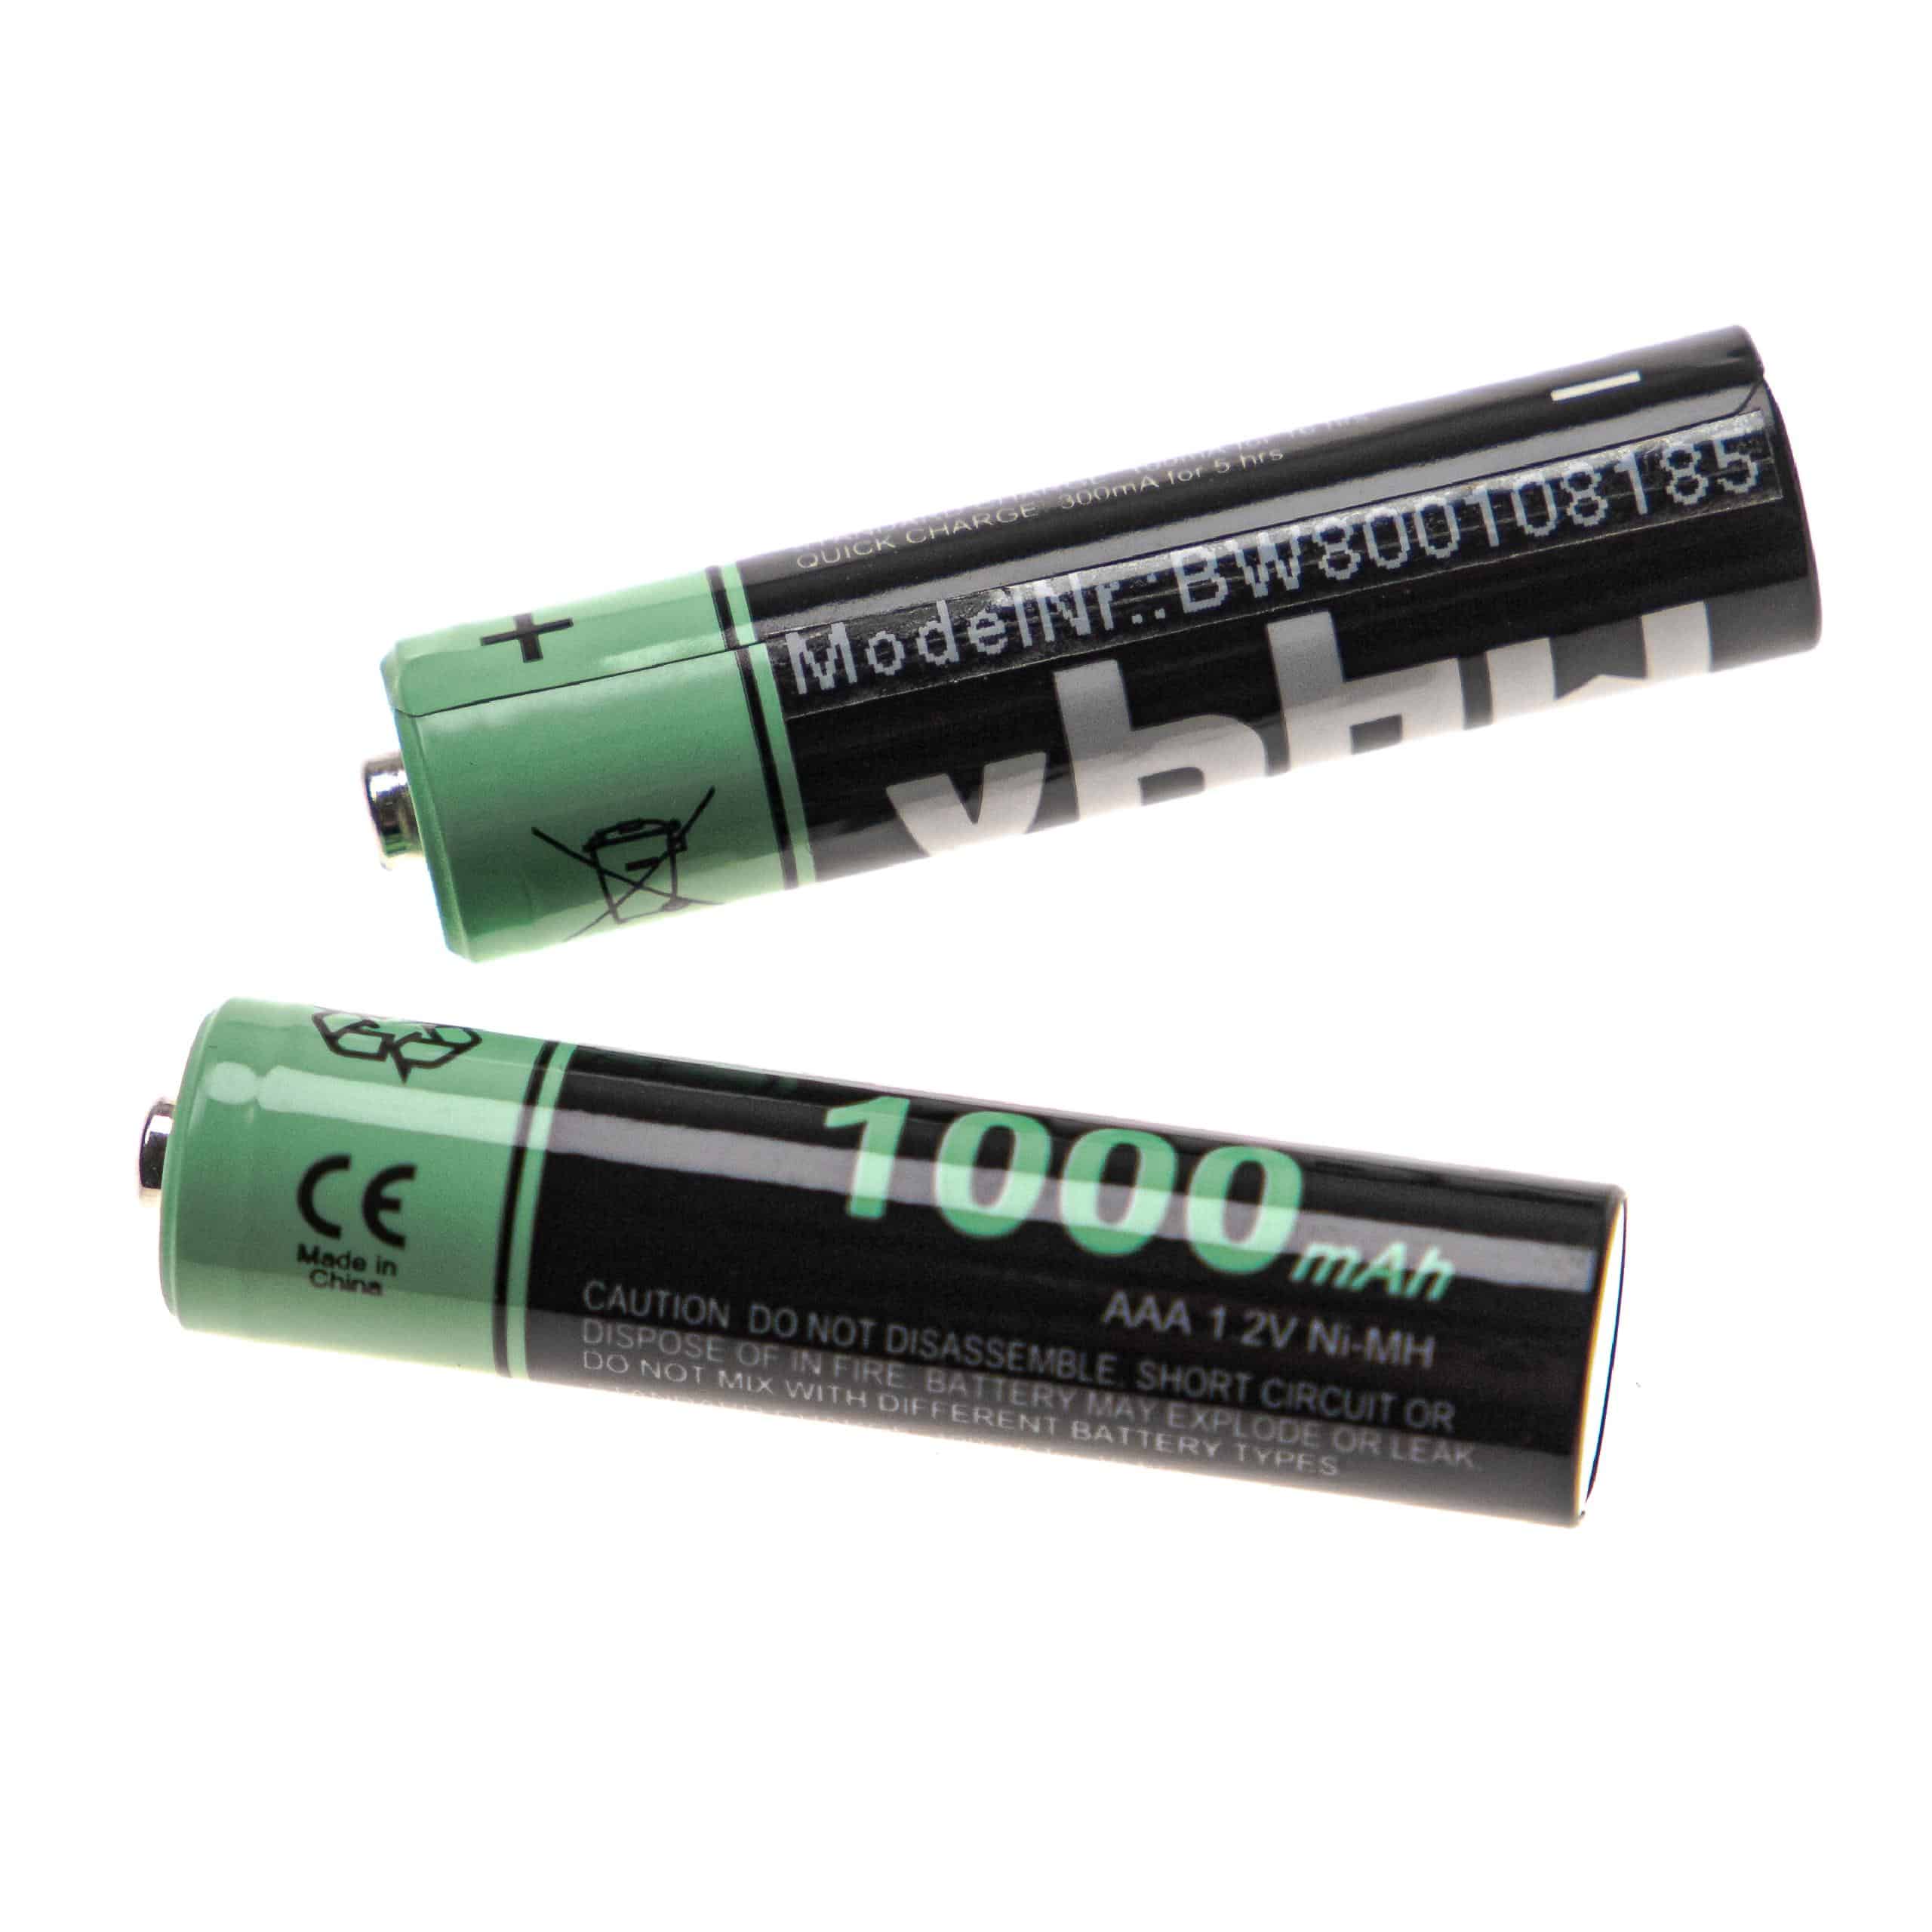 AAA Battery (2 Units) for Philips D4501, D6351, M3351, M3451, M3451B/38 Linea Lux, M5651, M6651, M6651WB Luceo